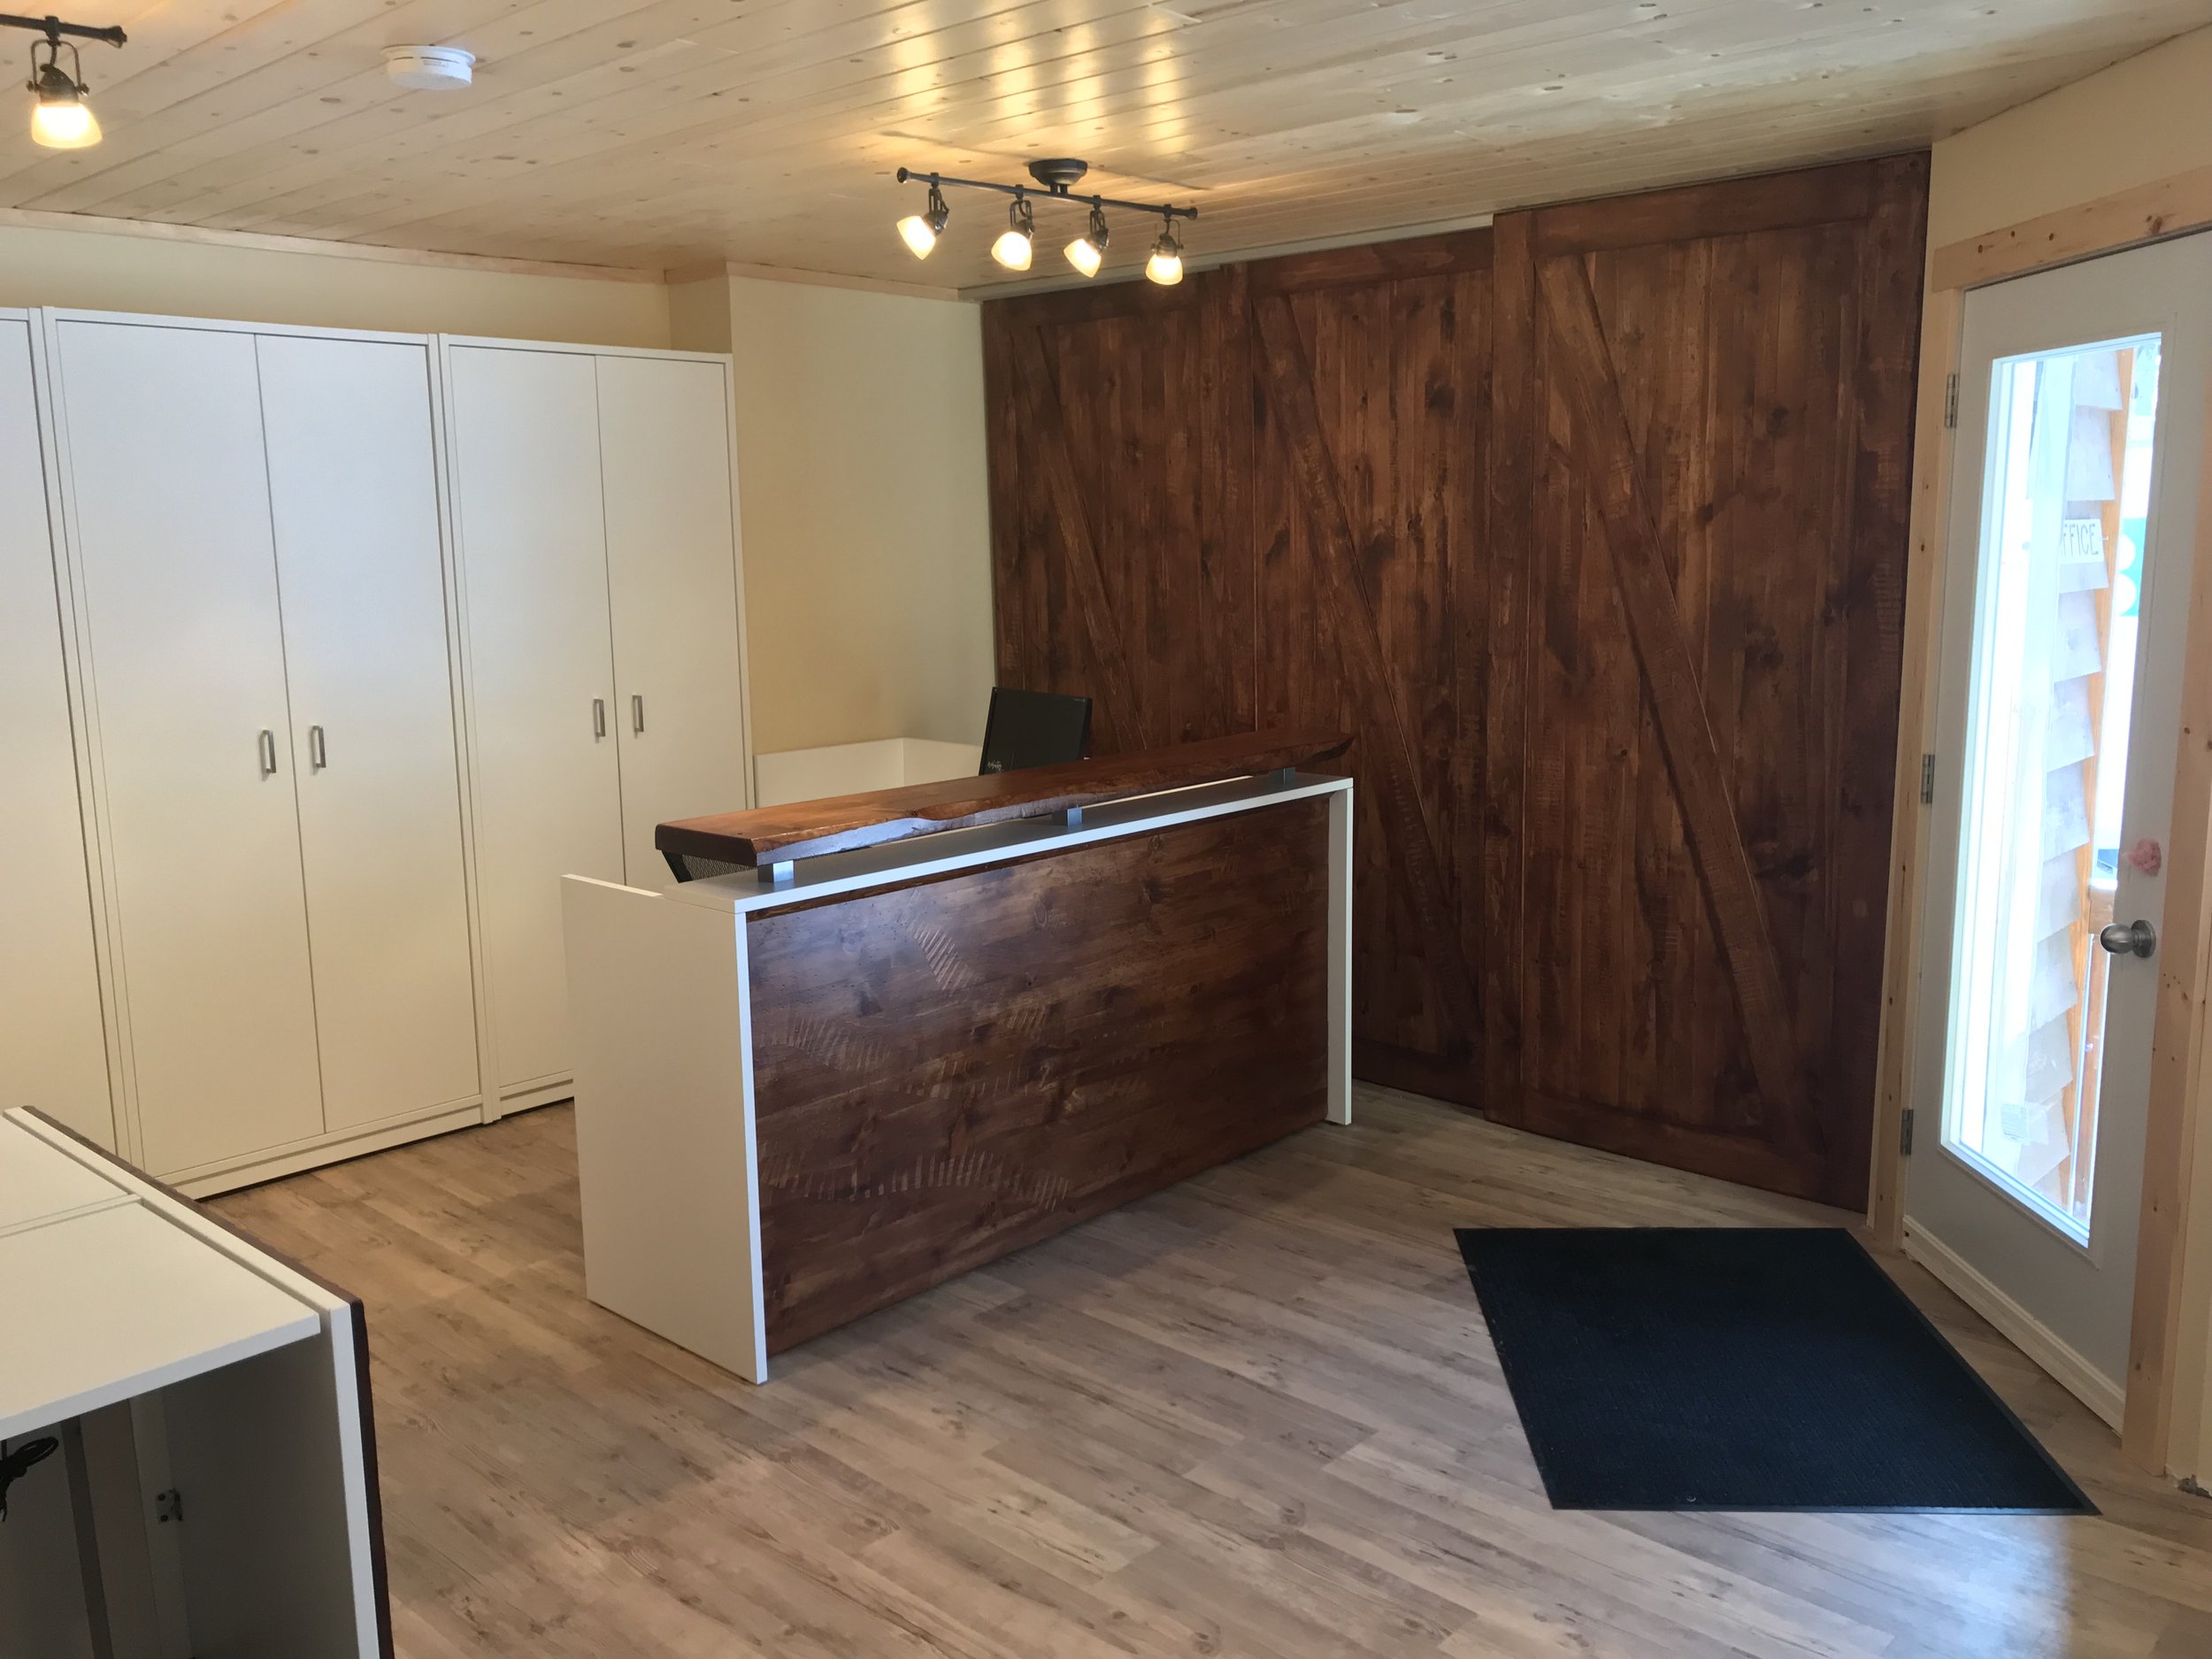  Our new reception desk, with some great barn doors hiding the electrical panels we couldn't completely cover. The great thing about this desk (and the new front door) is that we can now see right down the camp road for those arriving at camp, so we 